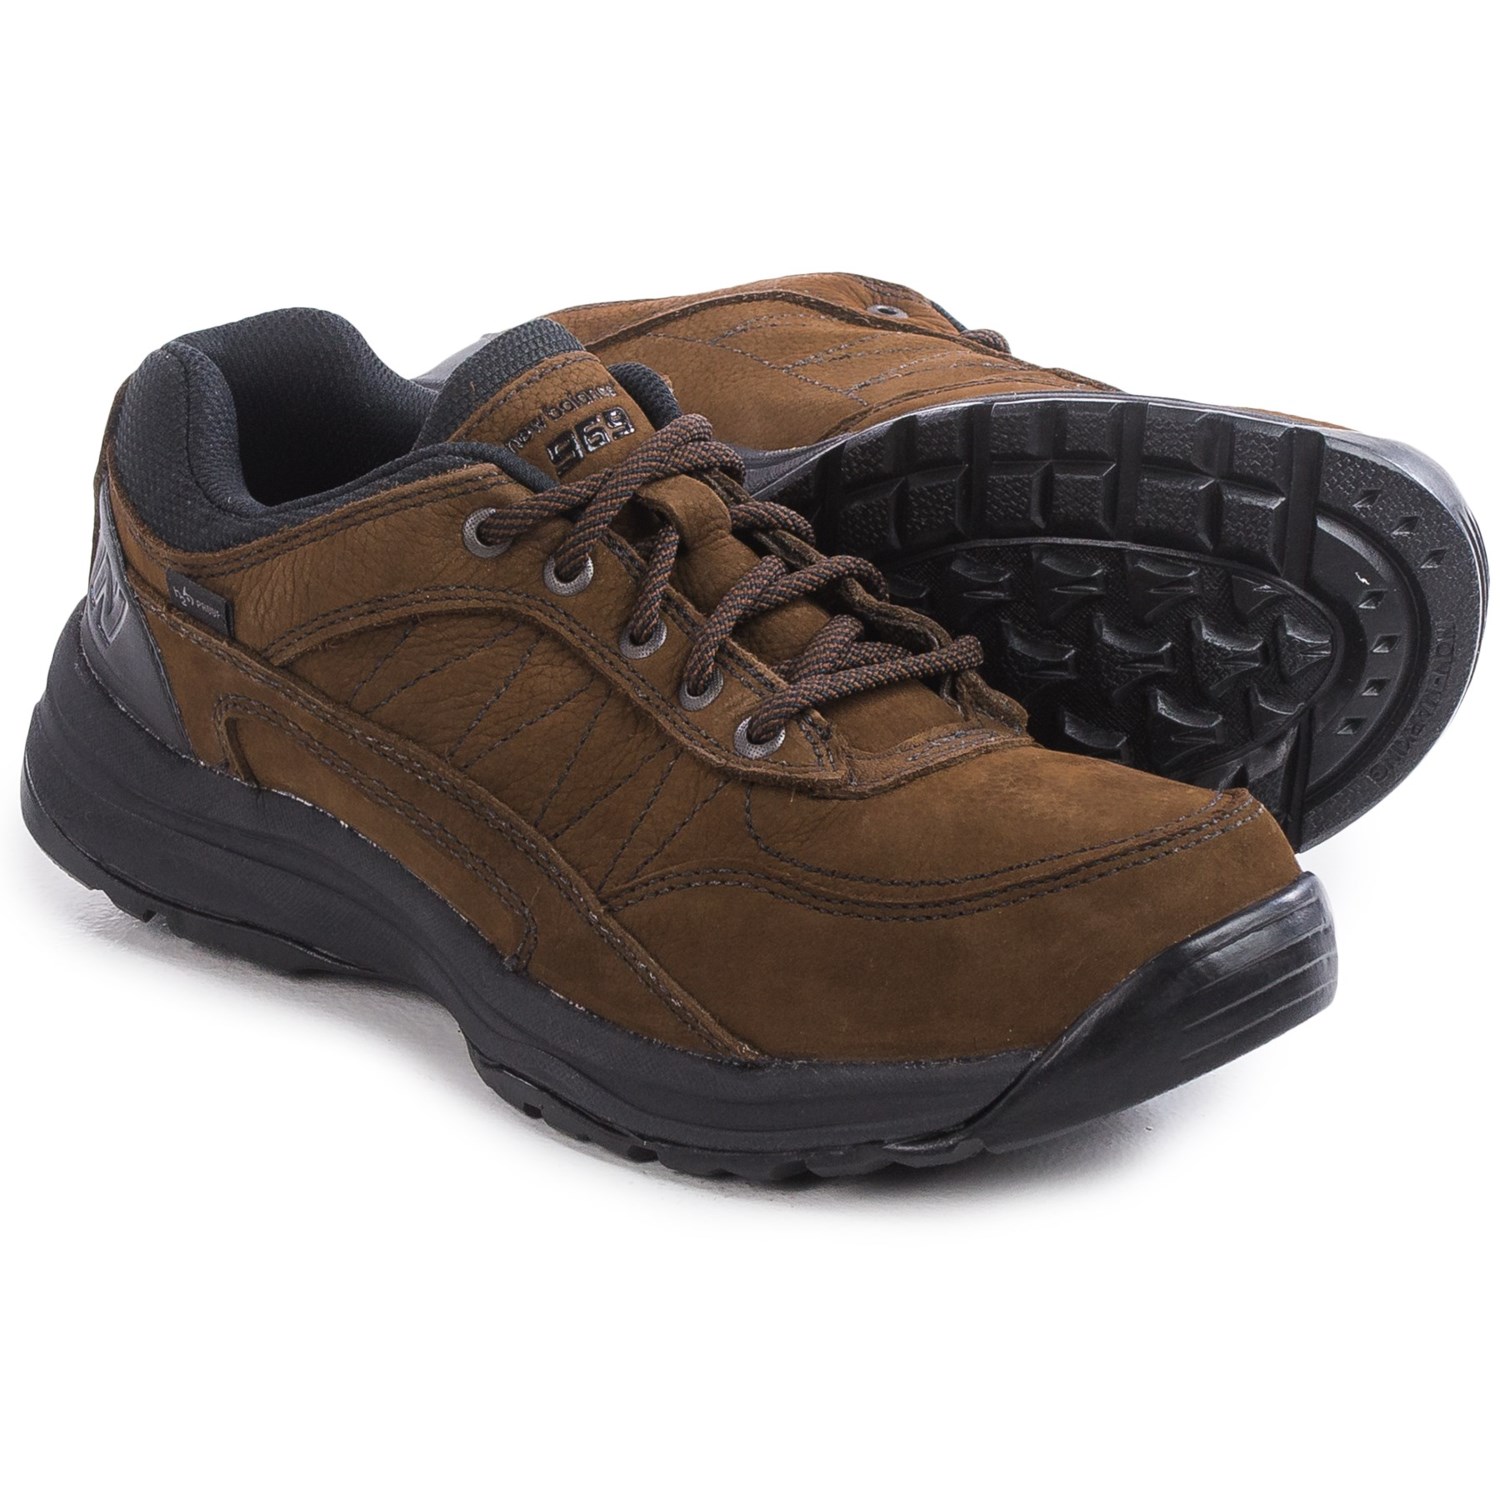 New Balance 969 Hiking Shoes (For Men) - Save 59%